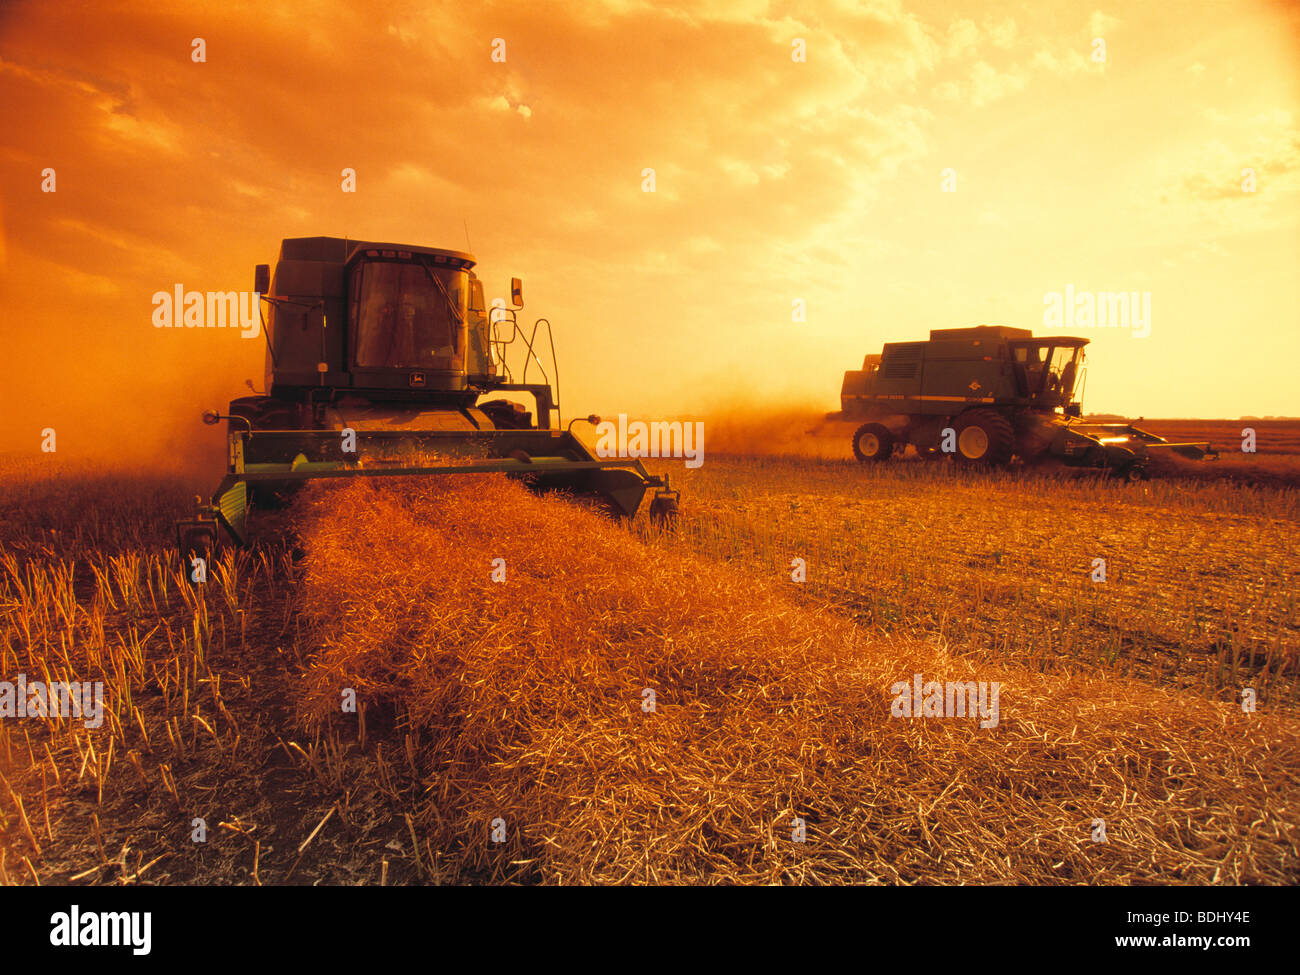 Agriculture - Combines harvesting swathed and dried canola at sunset / near Ile des Chenes, Manitoba, Canada. Stock Photo